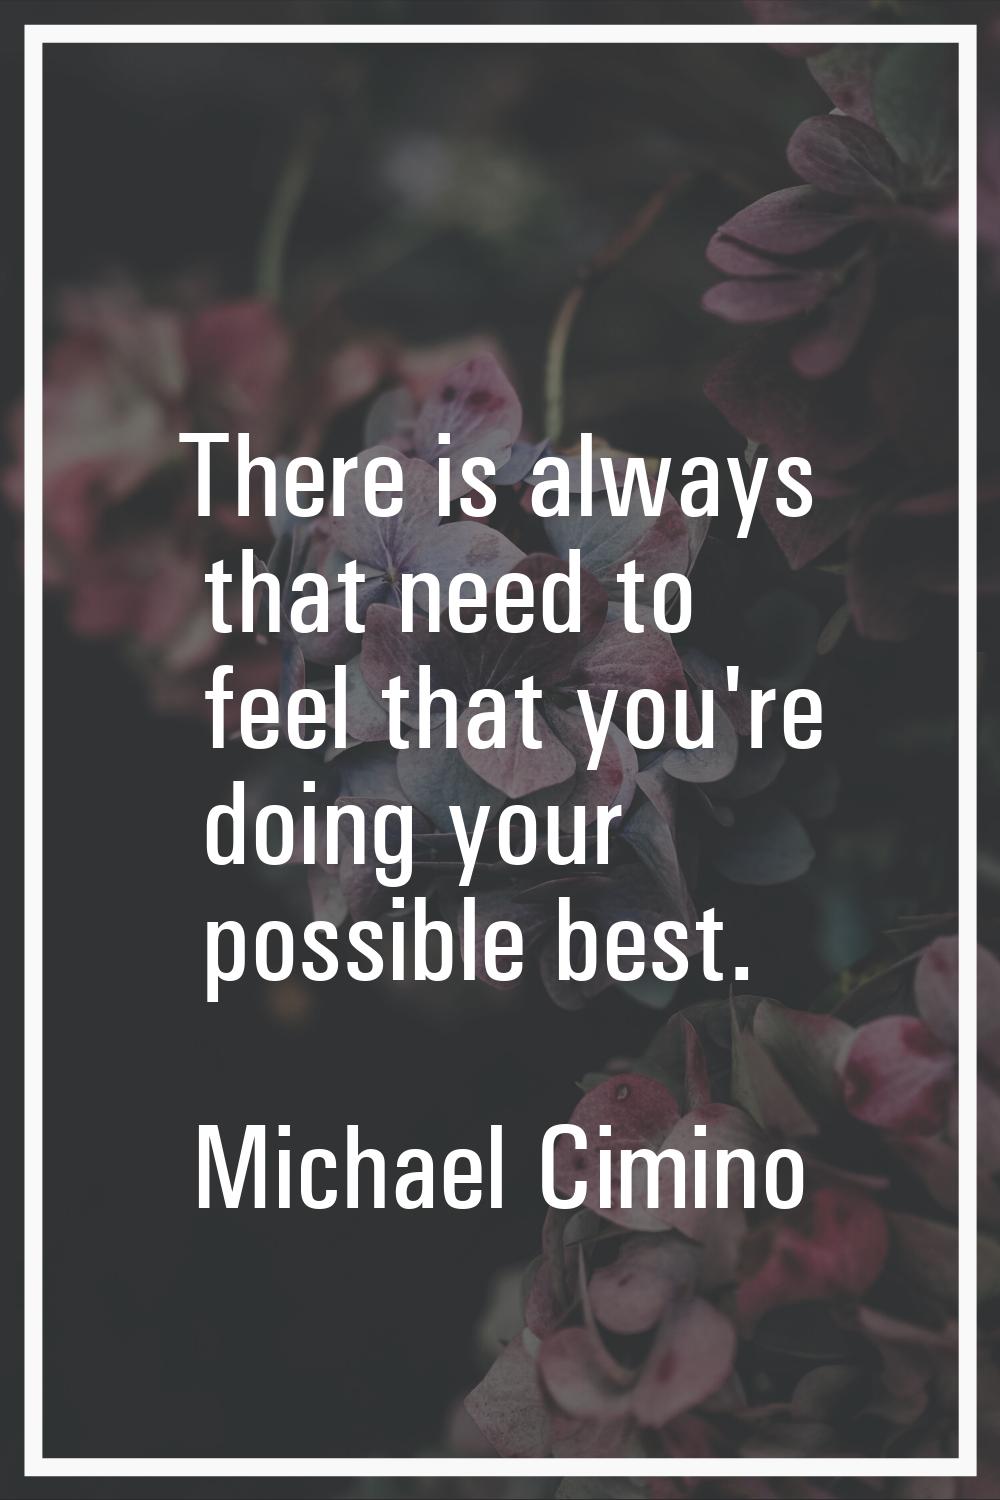 There is always that need to feel that you're doing your possible best.